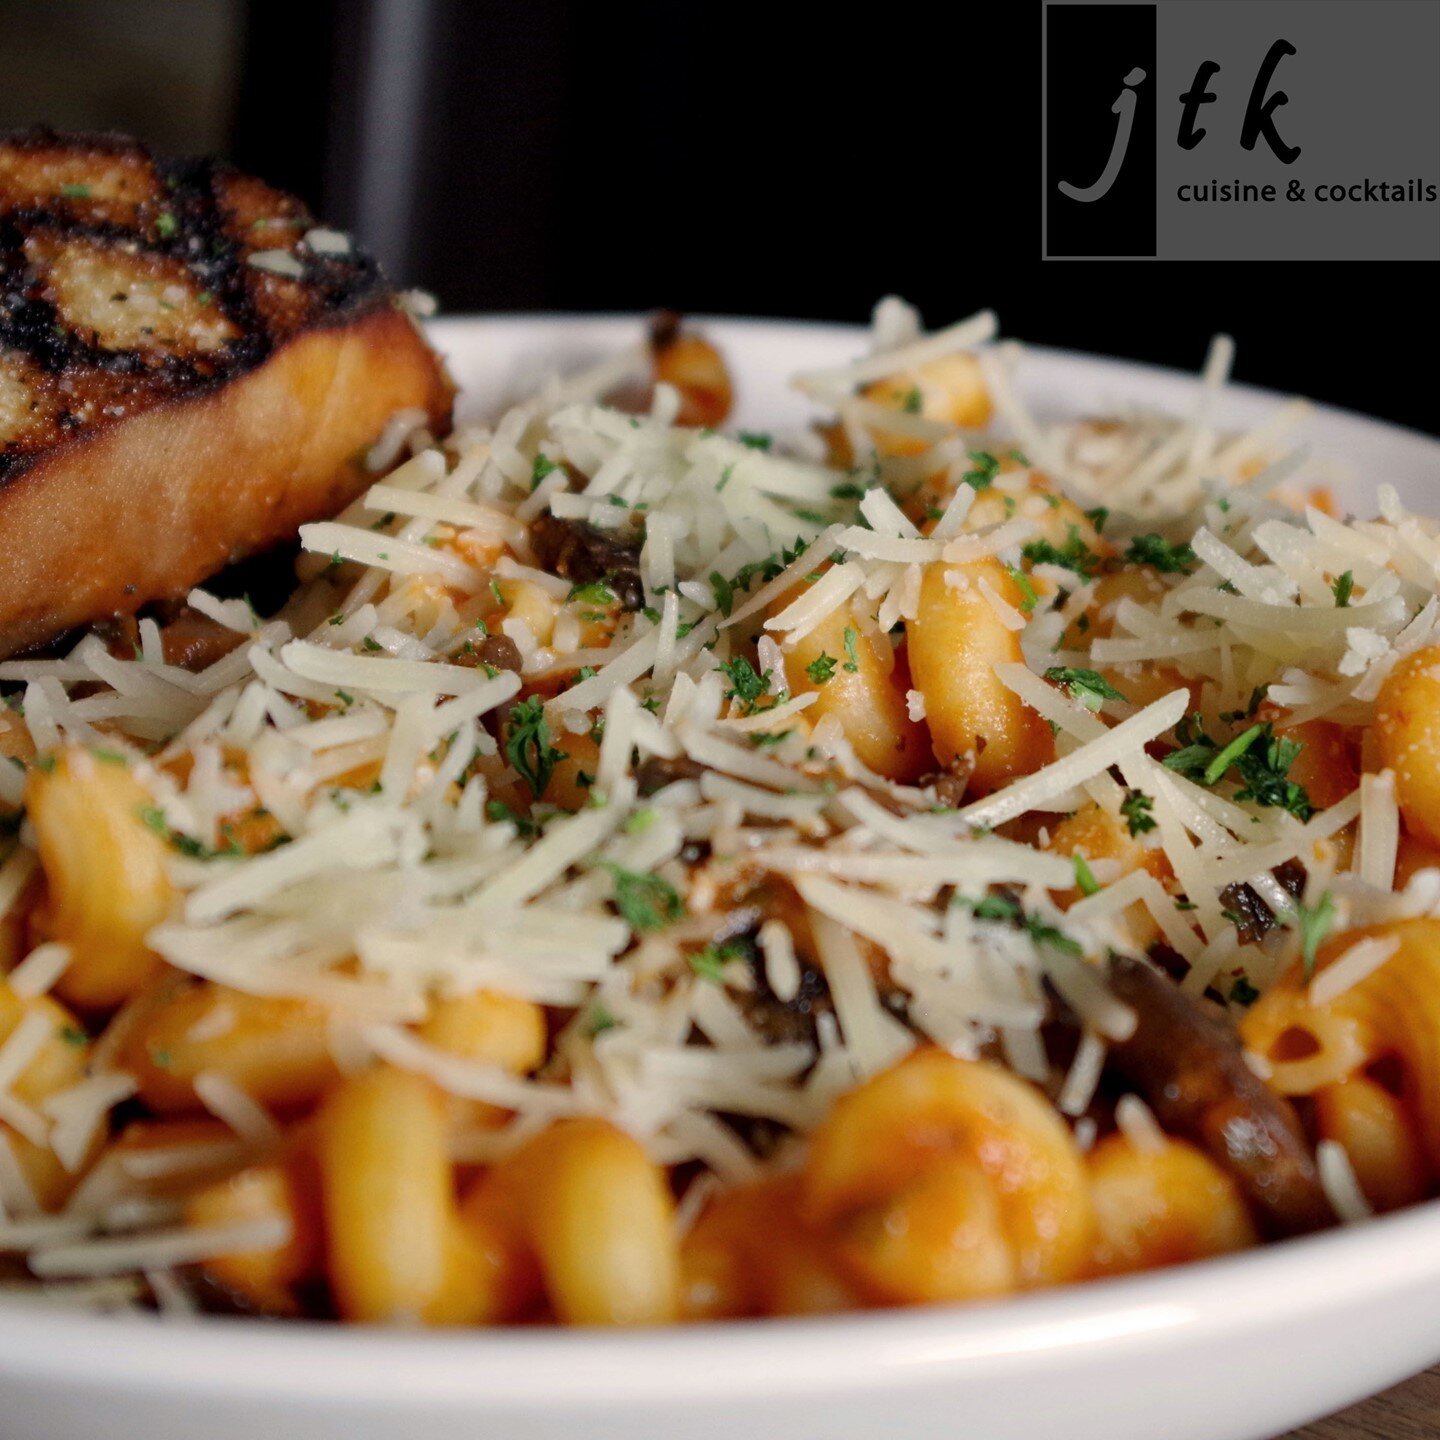 Need some dinner plans? Come on down to JTK! Our Cavatappi Pasta is a great choice for these chilly days. 😊 ⠀⠀⠀
⠀⠀⠀
#jtklnk #downtownlincoln #mylnk #lincolnhaymarket #restaurant #pasta #comfortfood